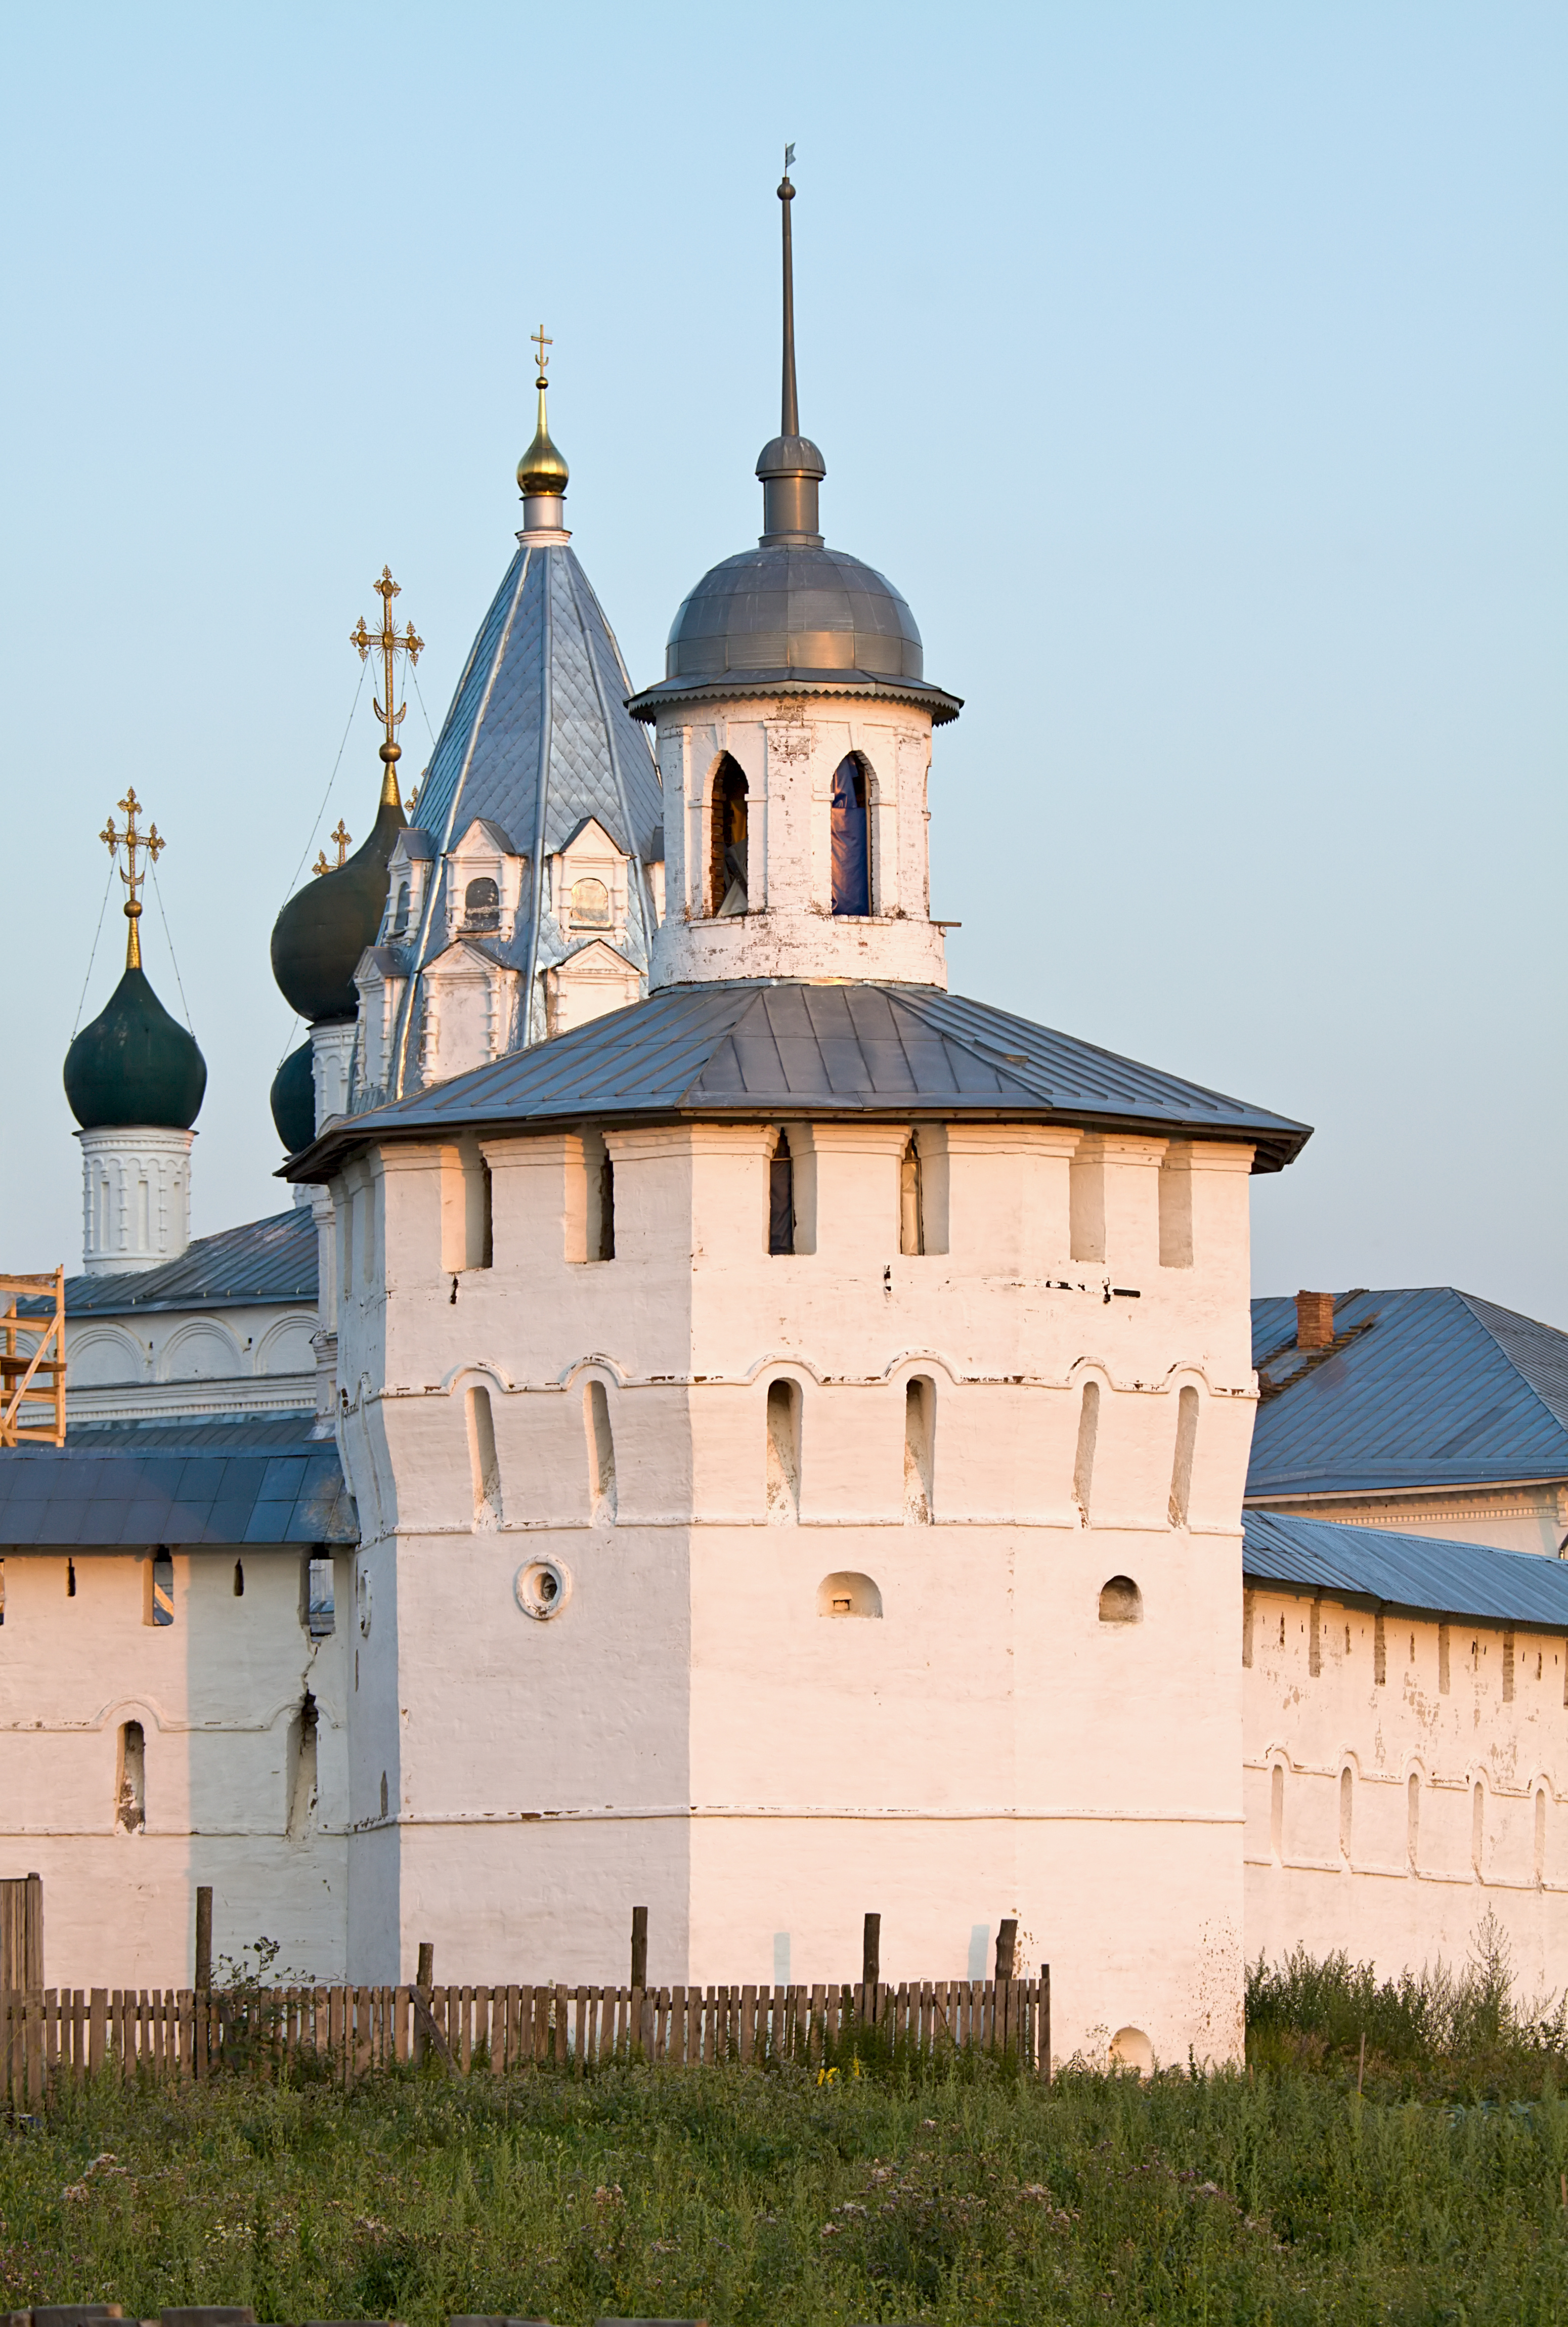 Nikitsky Monastery, the north-west tower (red)